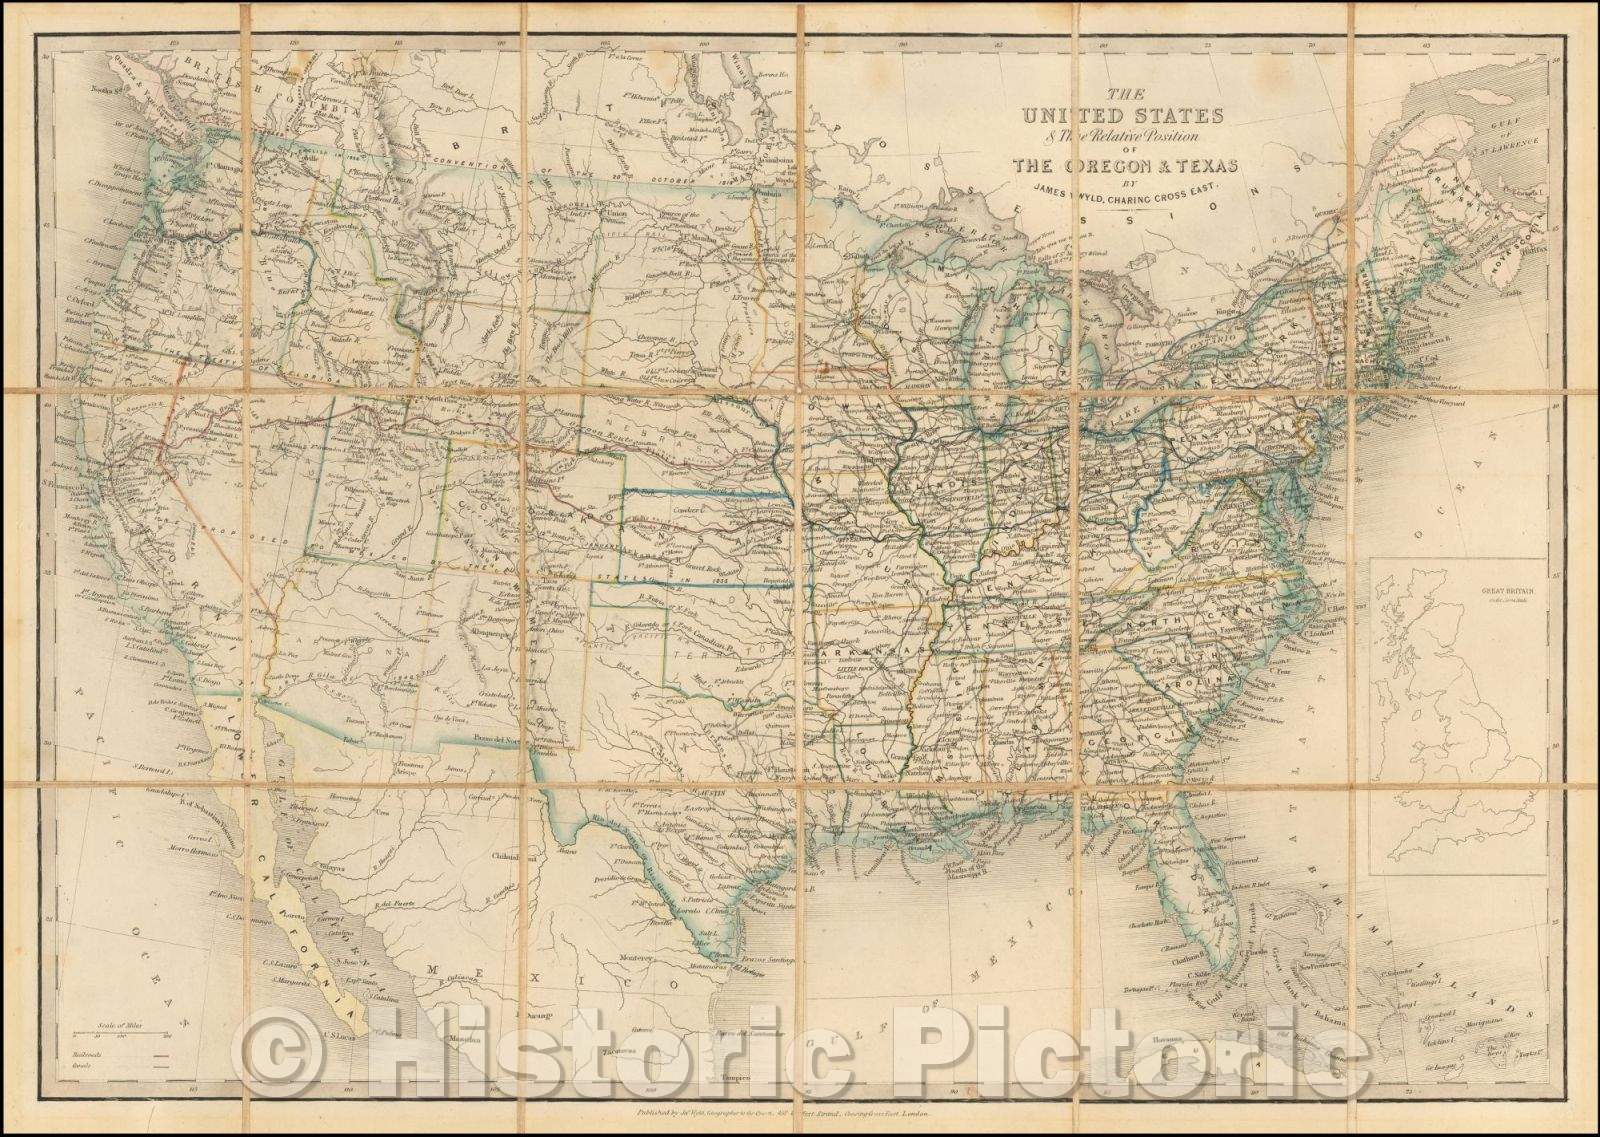 Historic Map - The United States & The Relative Position of The Oregon & Texas, 1868, James Wyld - Vintage Wall Art